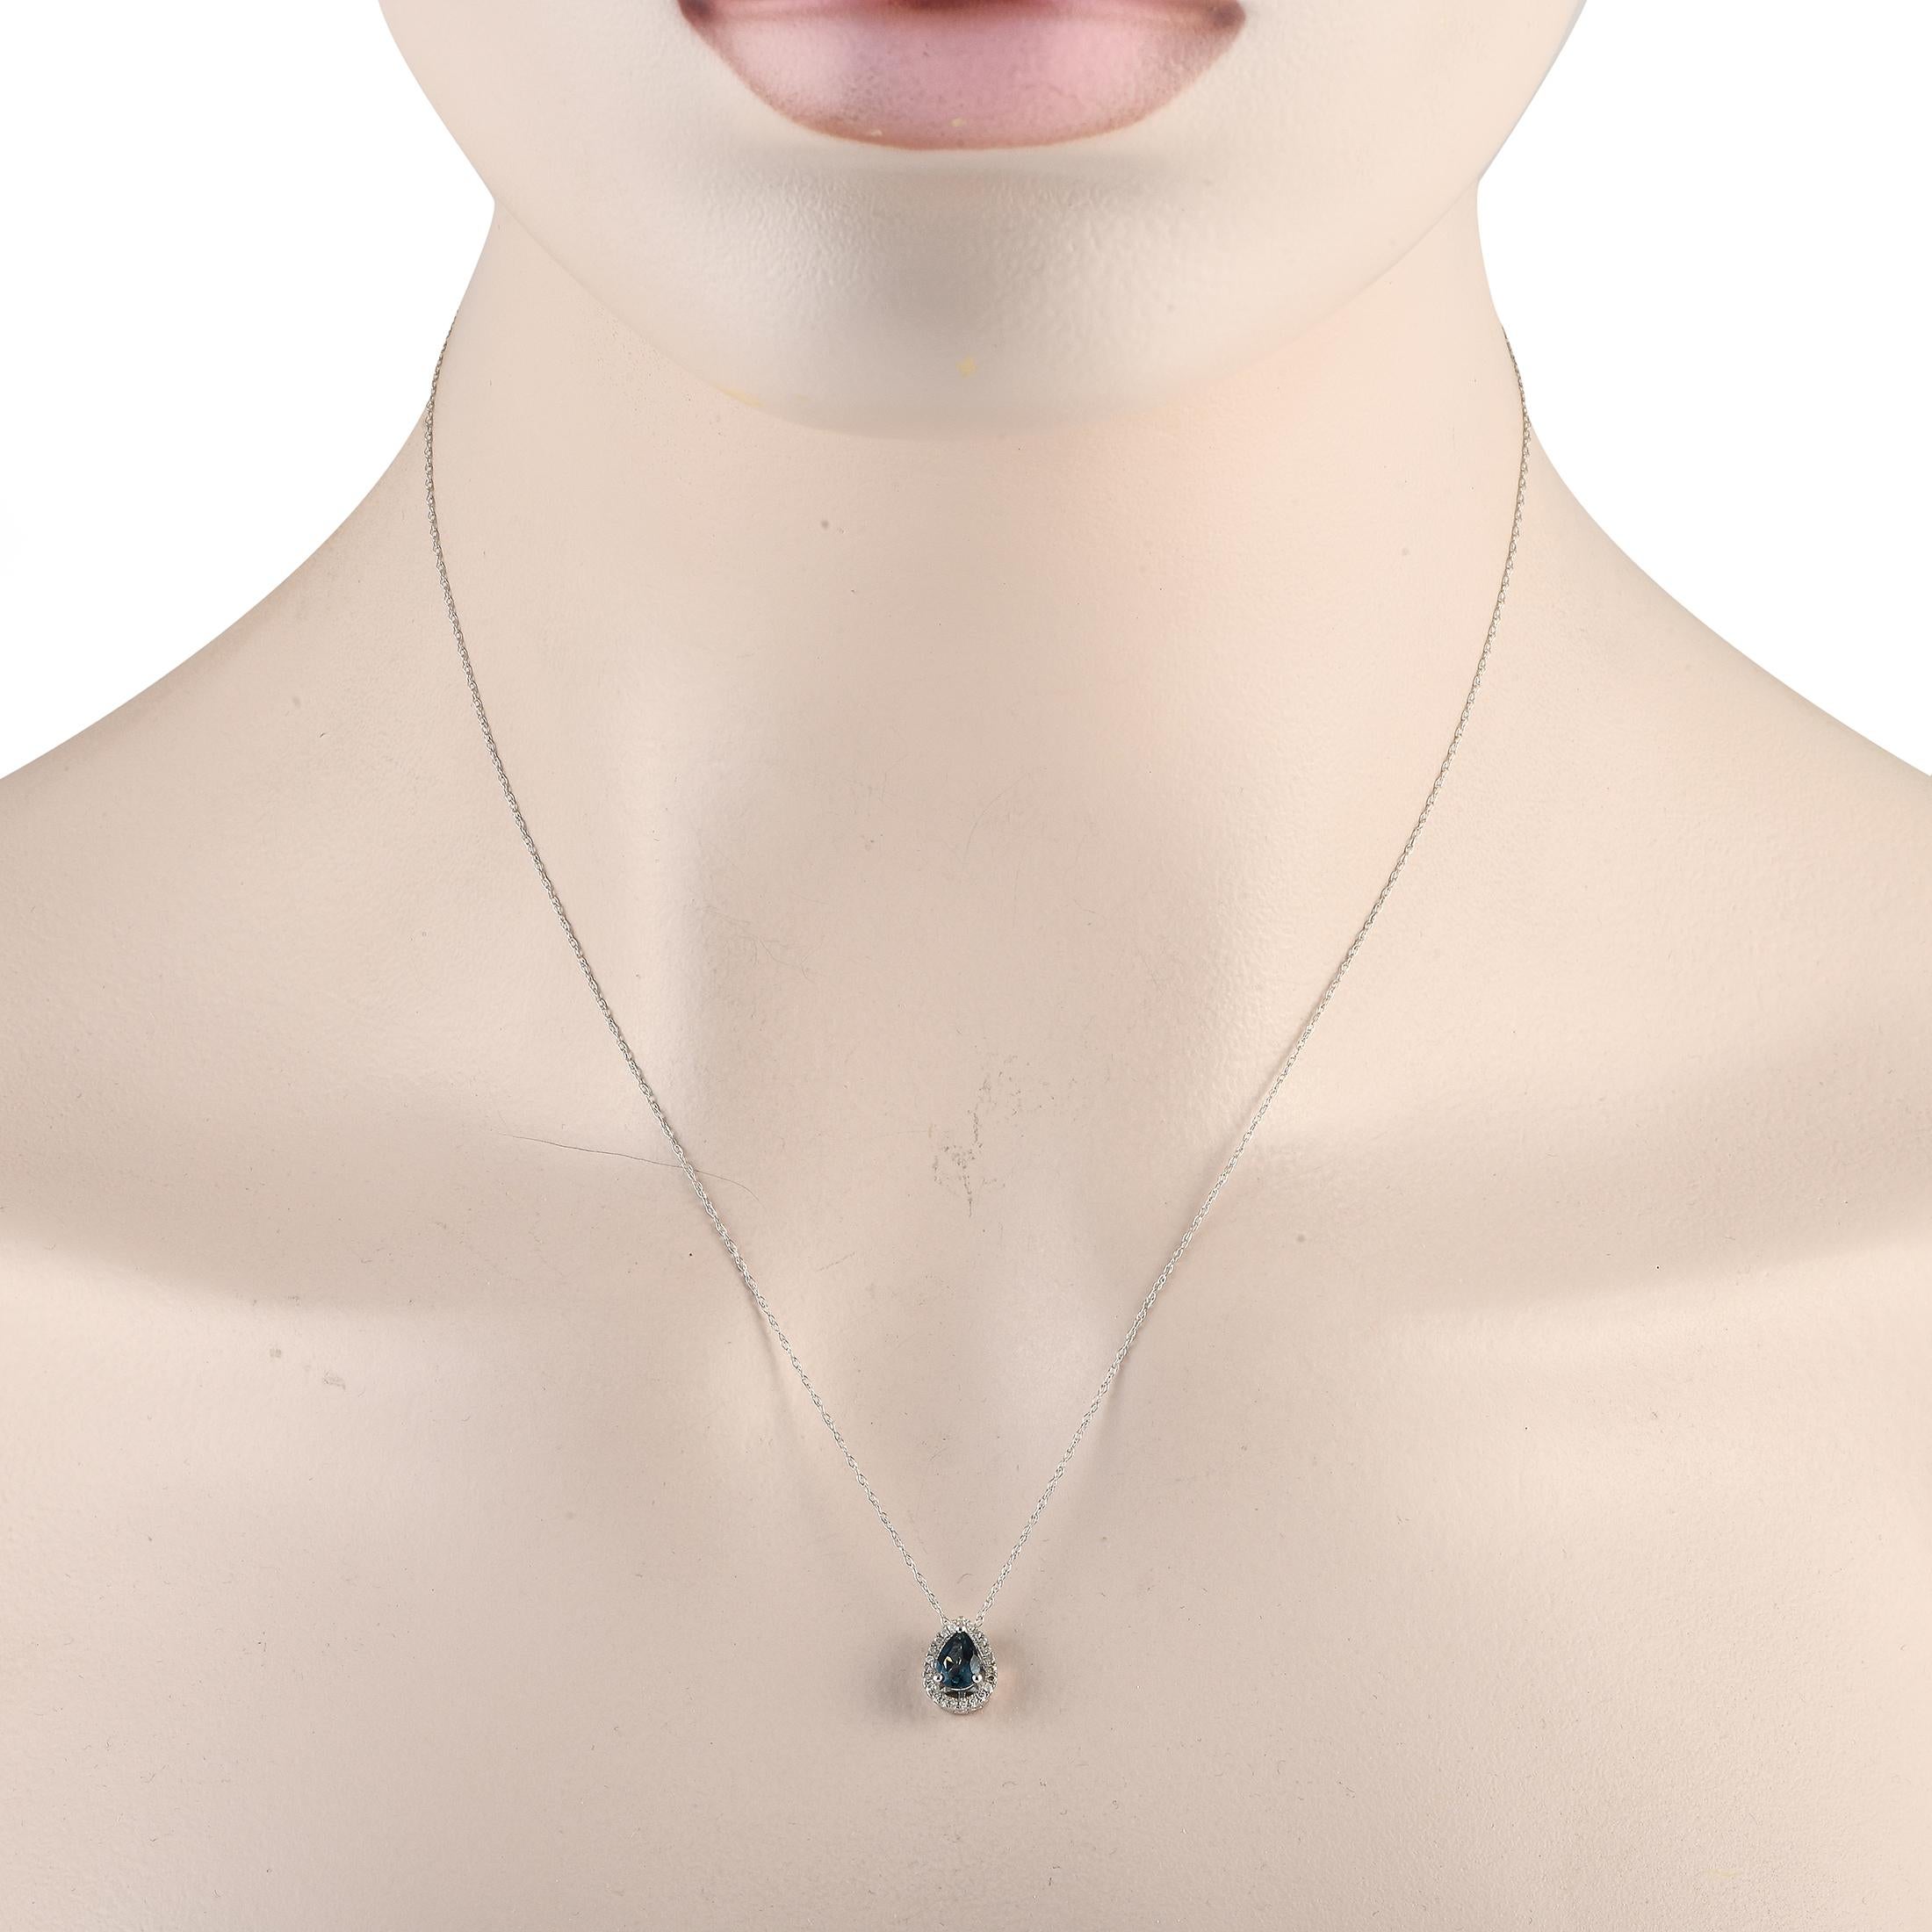 A pear-shaped blue topaz gemstone serves as a stunning focal point on this stylish luxury necklace. Incredibly elegant, this piece features a 14K white gold pendant measuring 0.45 long by 0.25 wide suspended from an 18 chain. Diamonds with a total